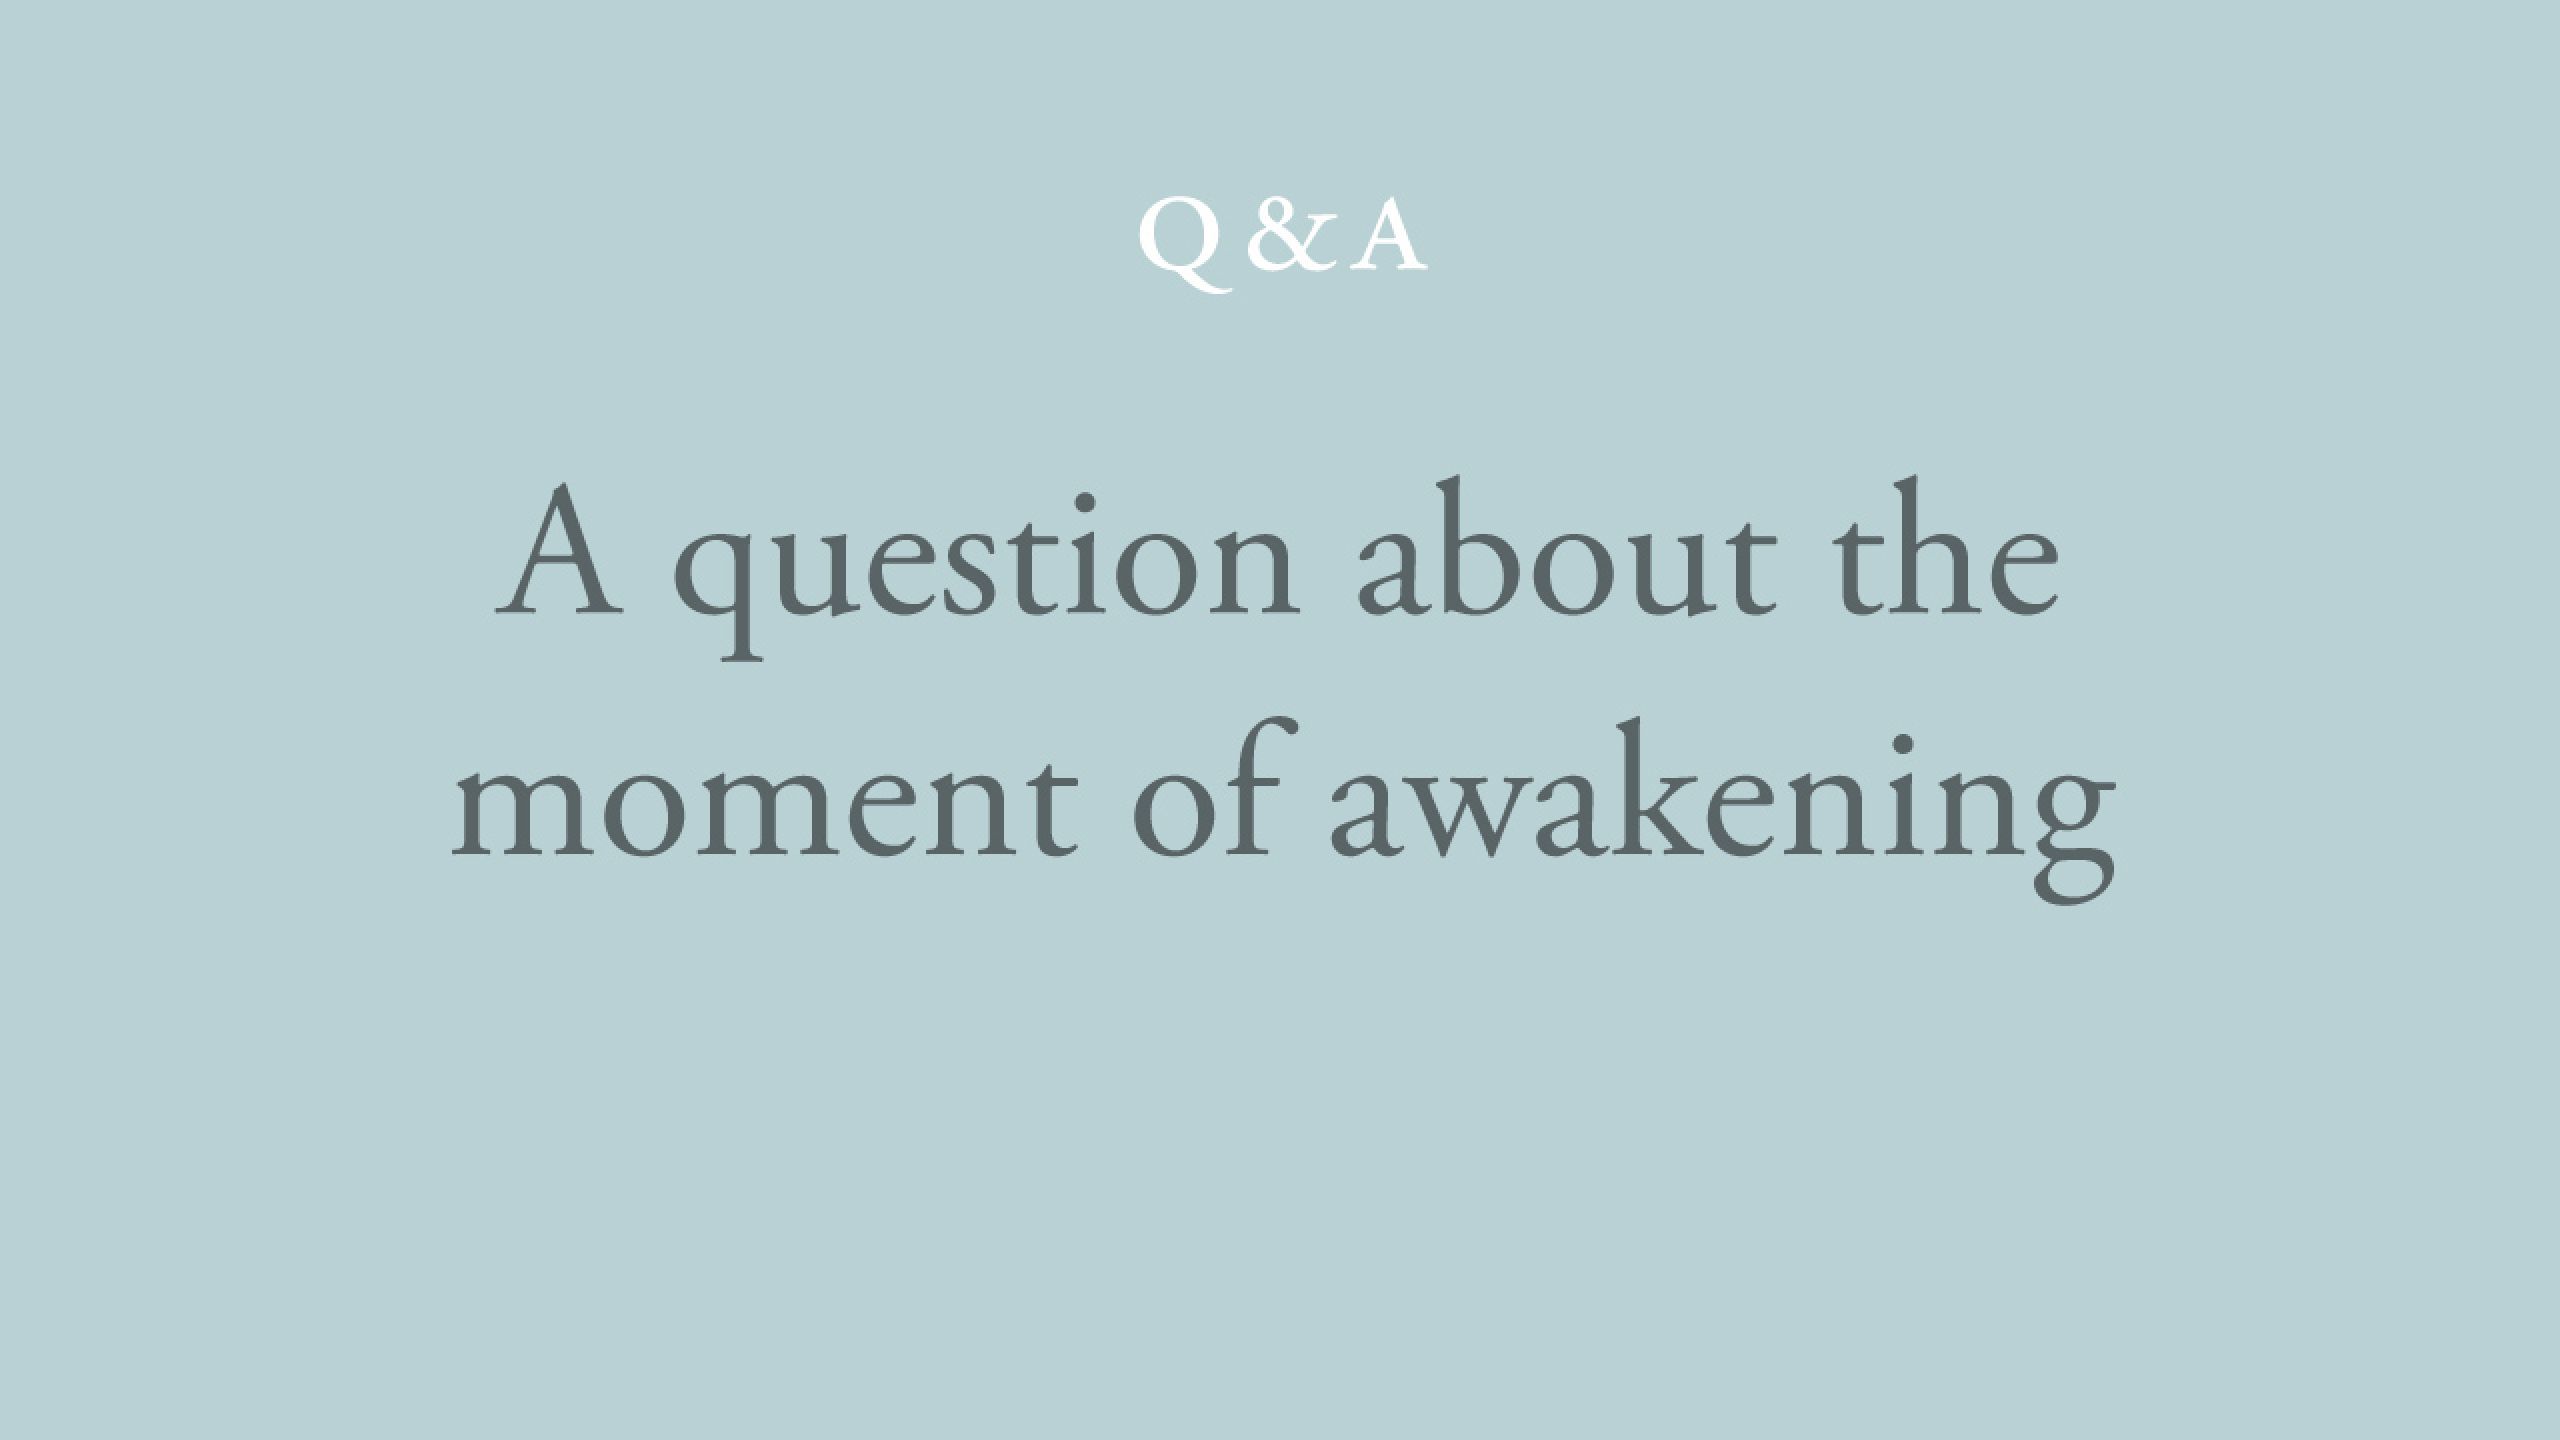 Do questions continue after awakening?